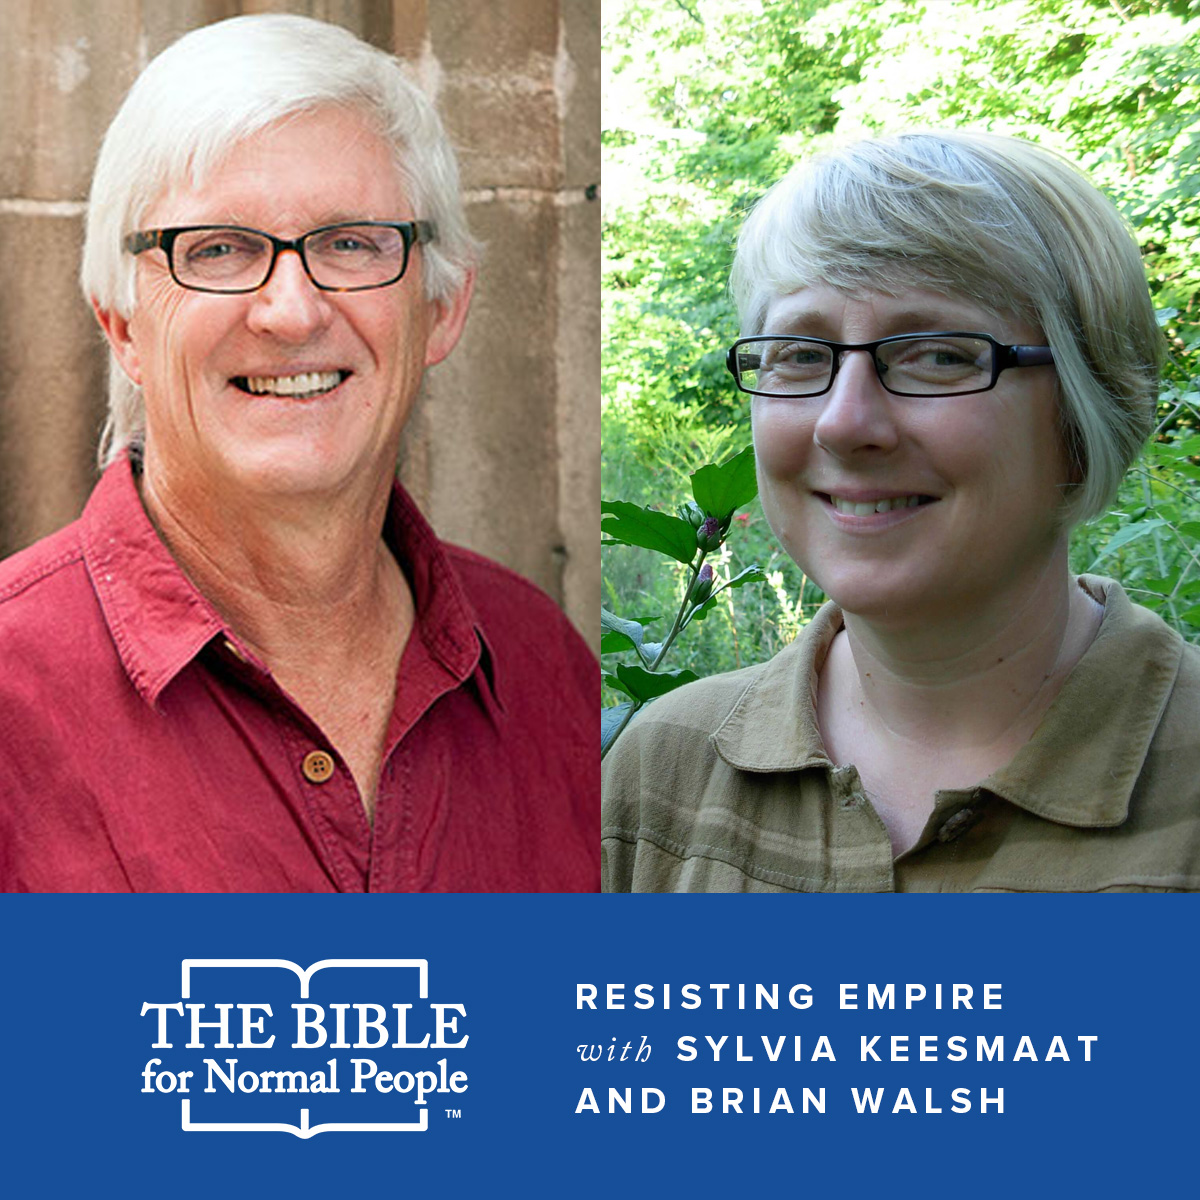 Interview with Dr. Sylvia Keesmaat and Dr. Brian Walsh: Resisting Empire in the Book of Romans